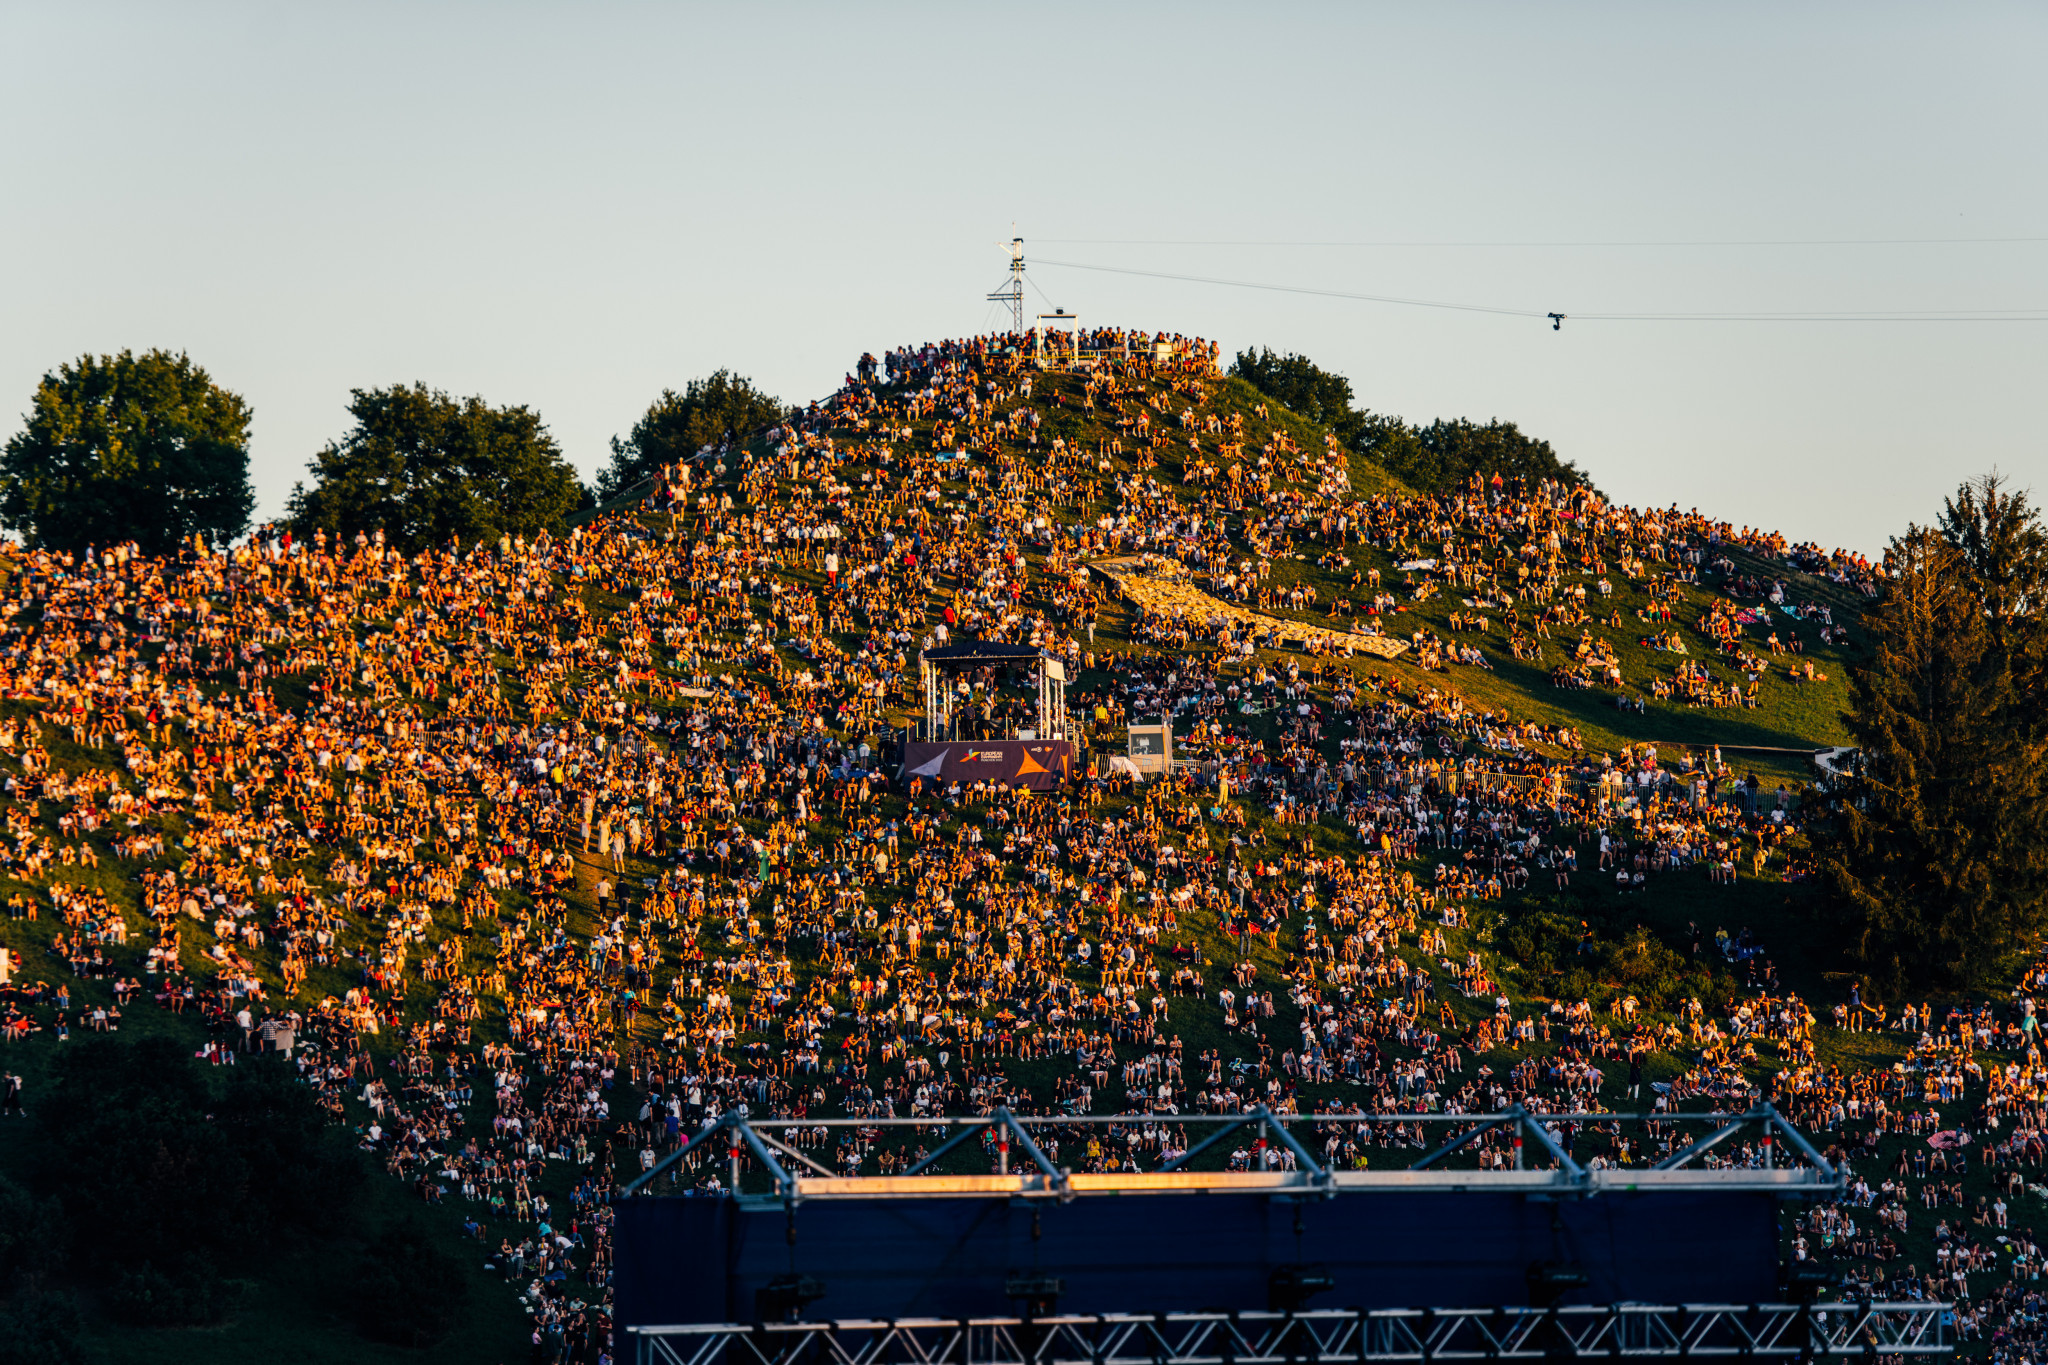 Fans turned out in huge numbers for the Roofs festival and the European Championships ©Munich 2022